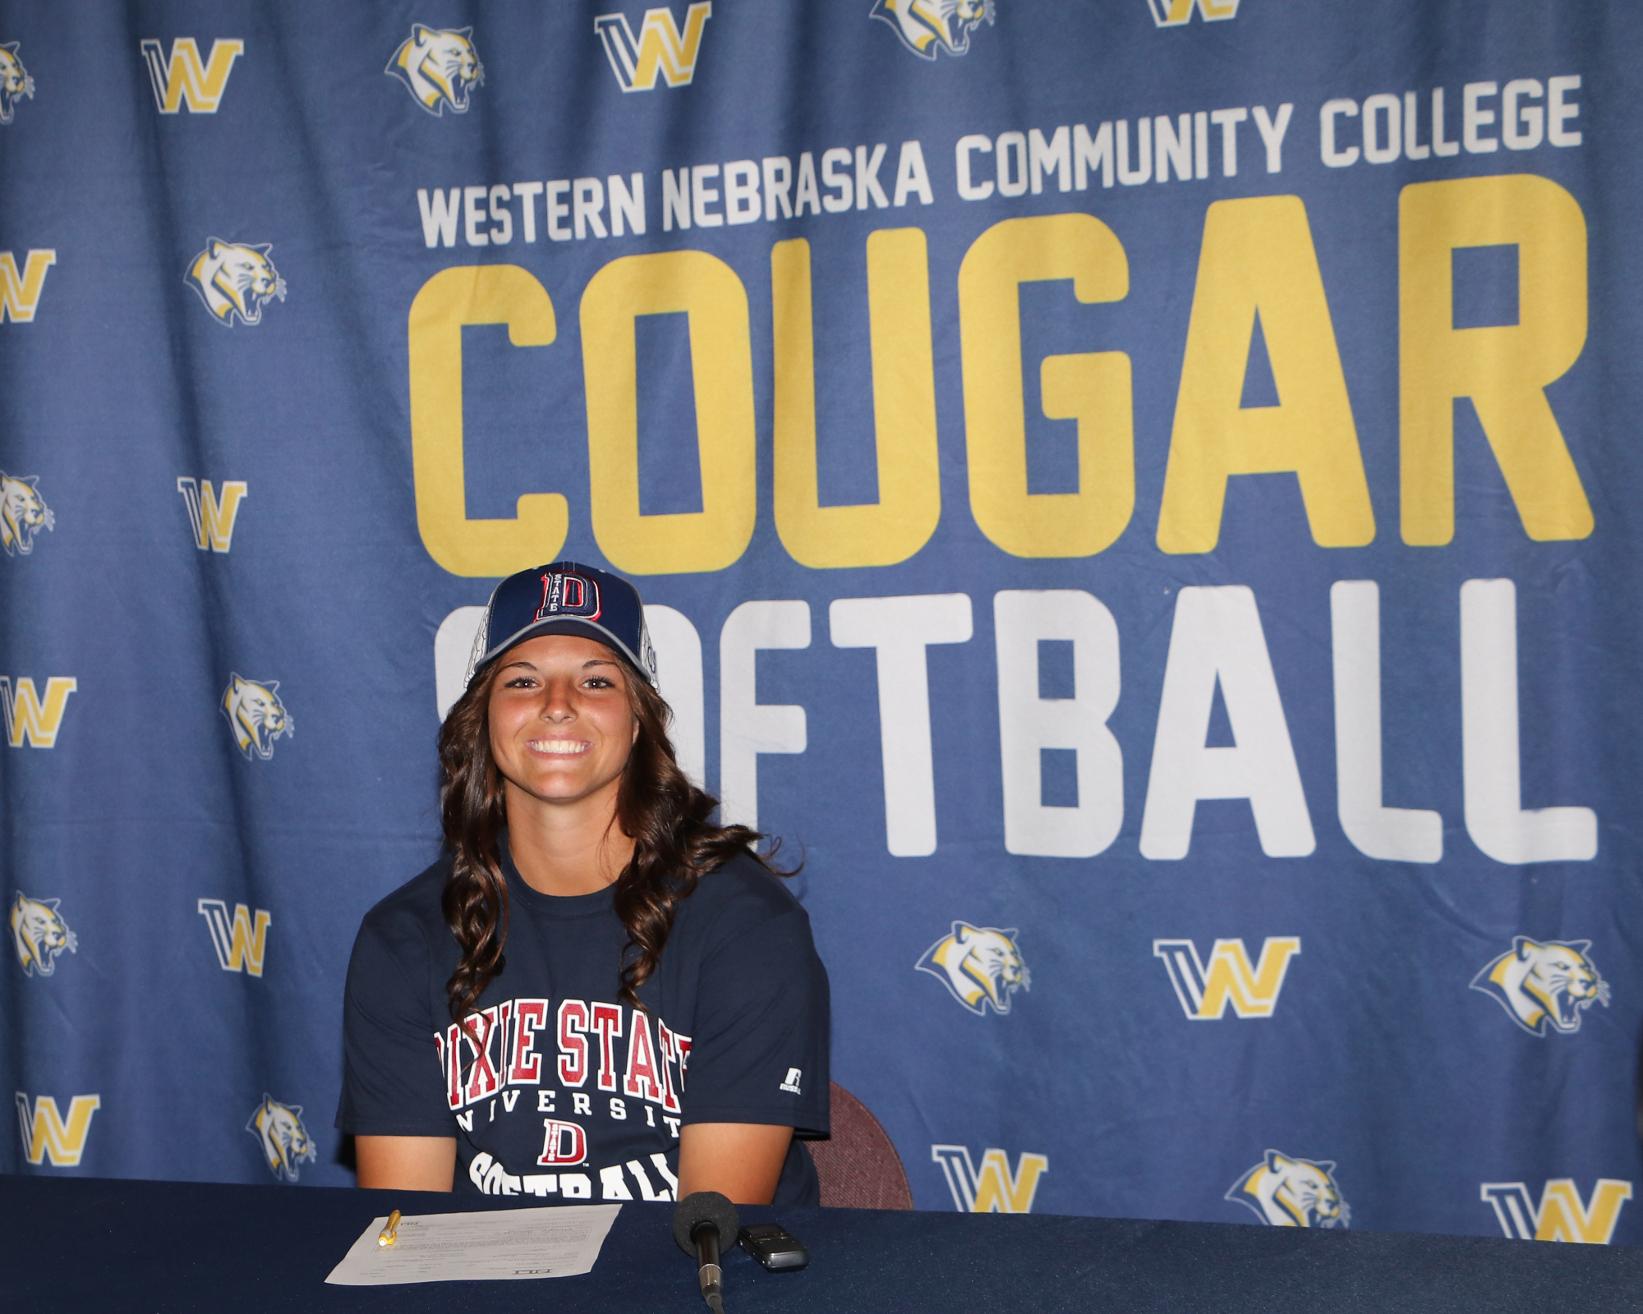 Sawyer signs to play at Dixie State